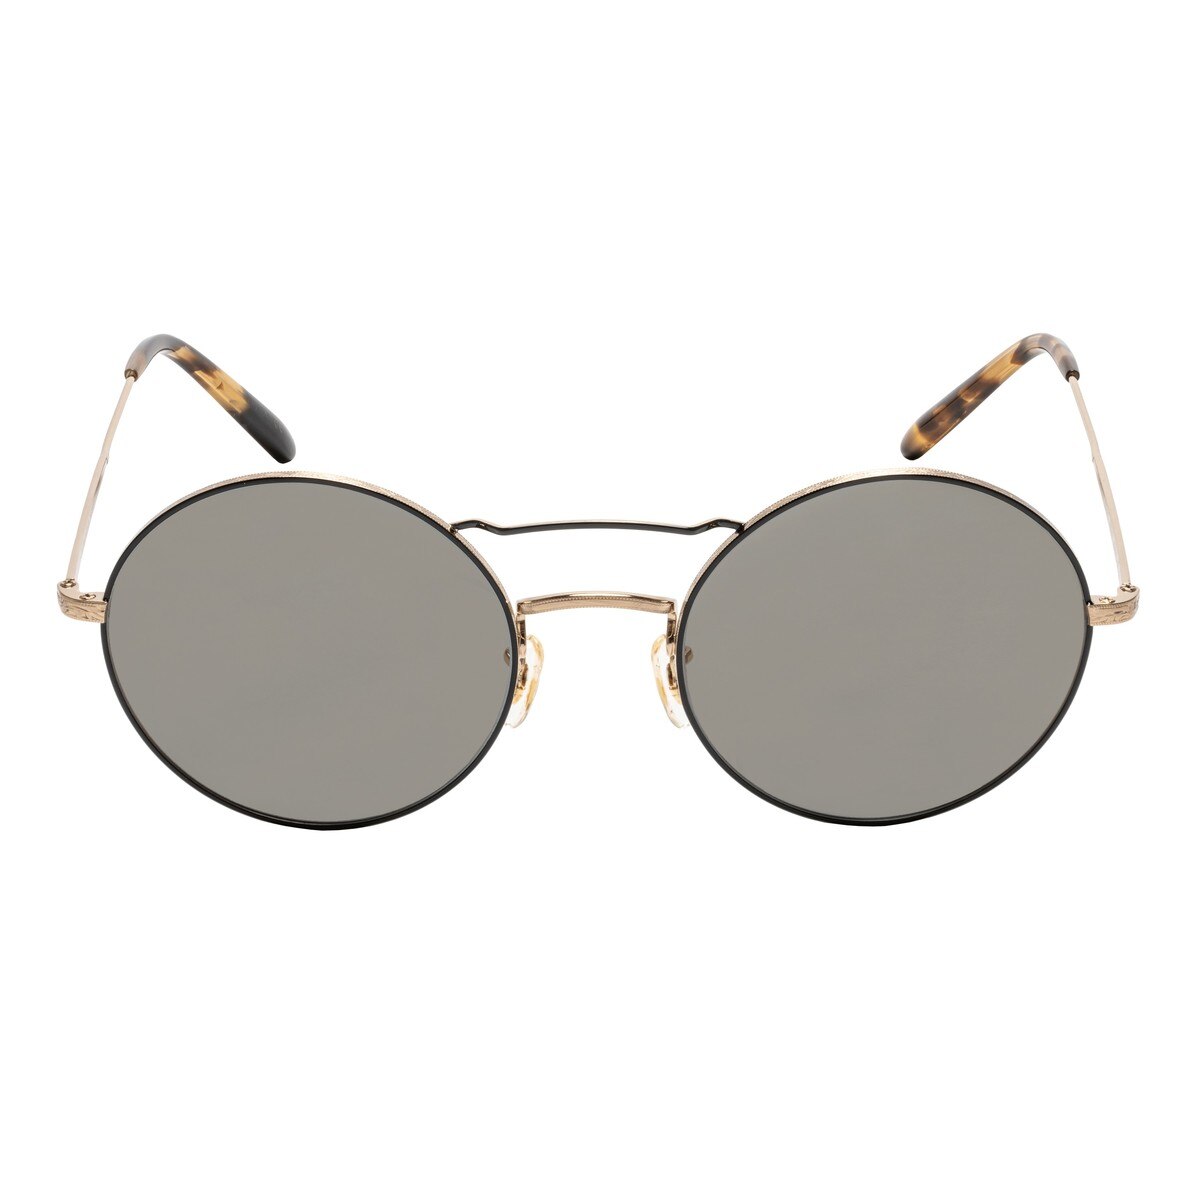 Oliver Peoples Costco Greece, SAVE 55% 